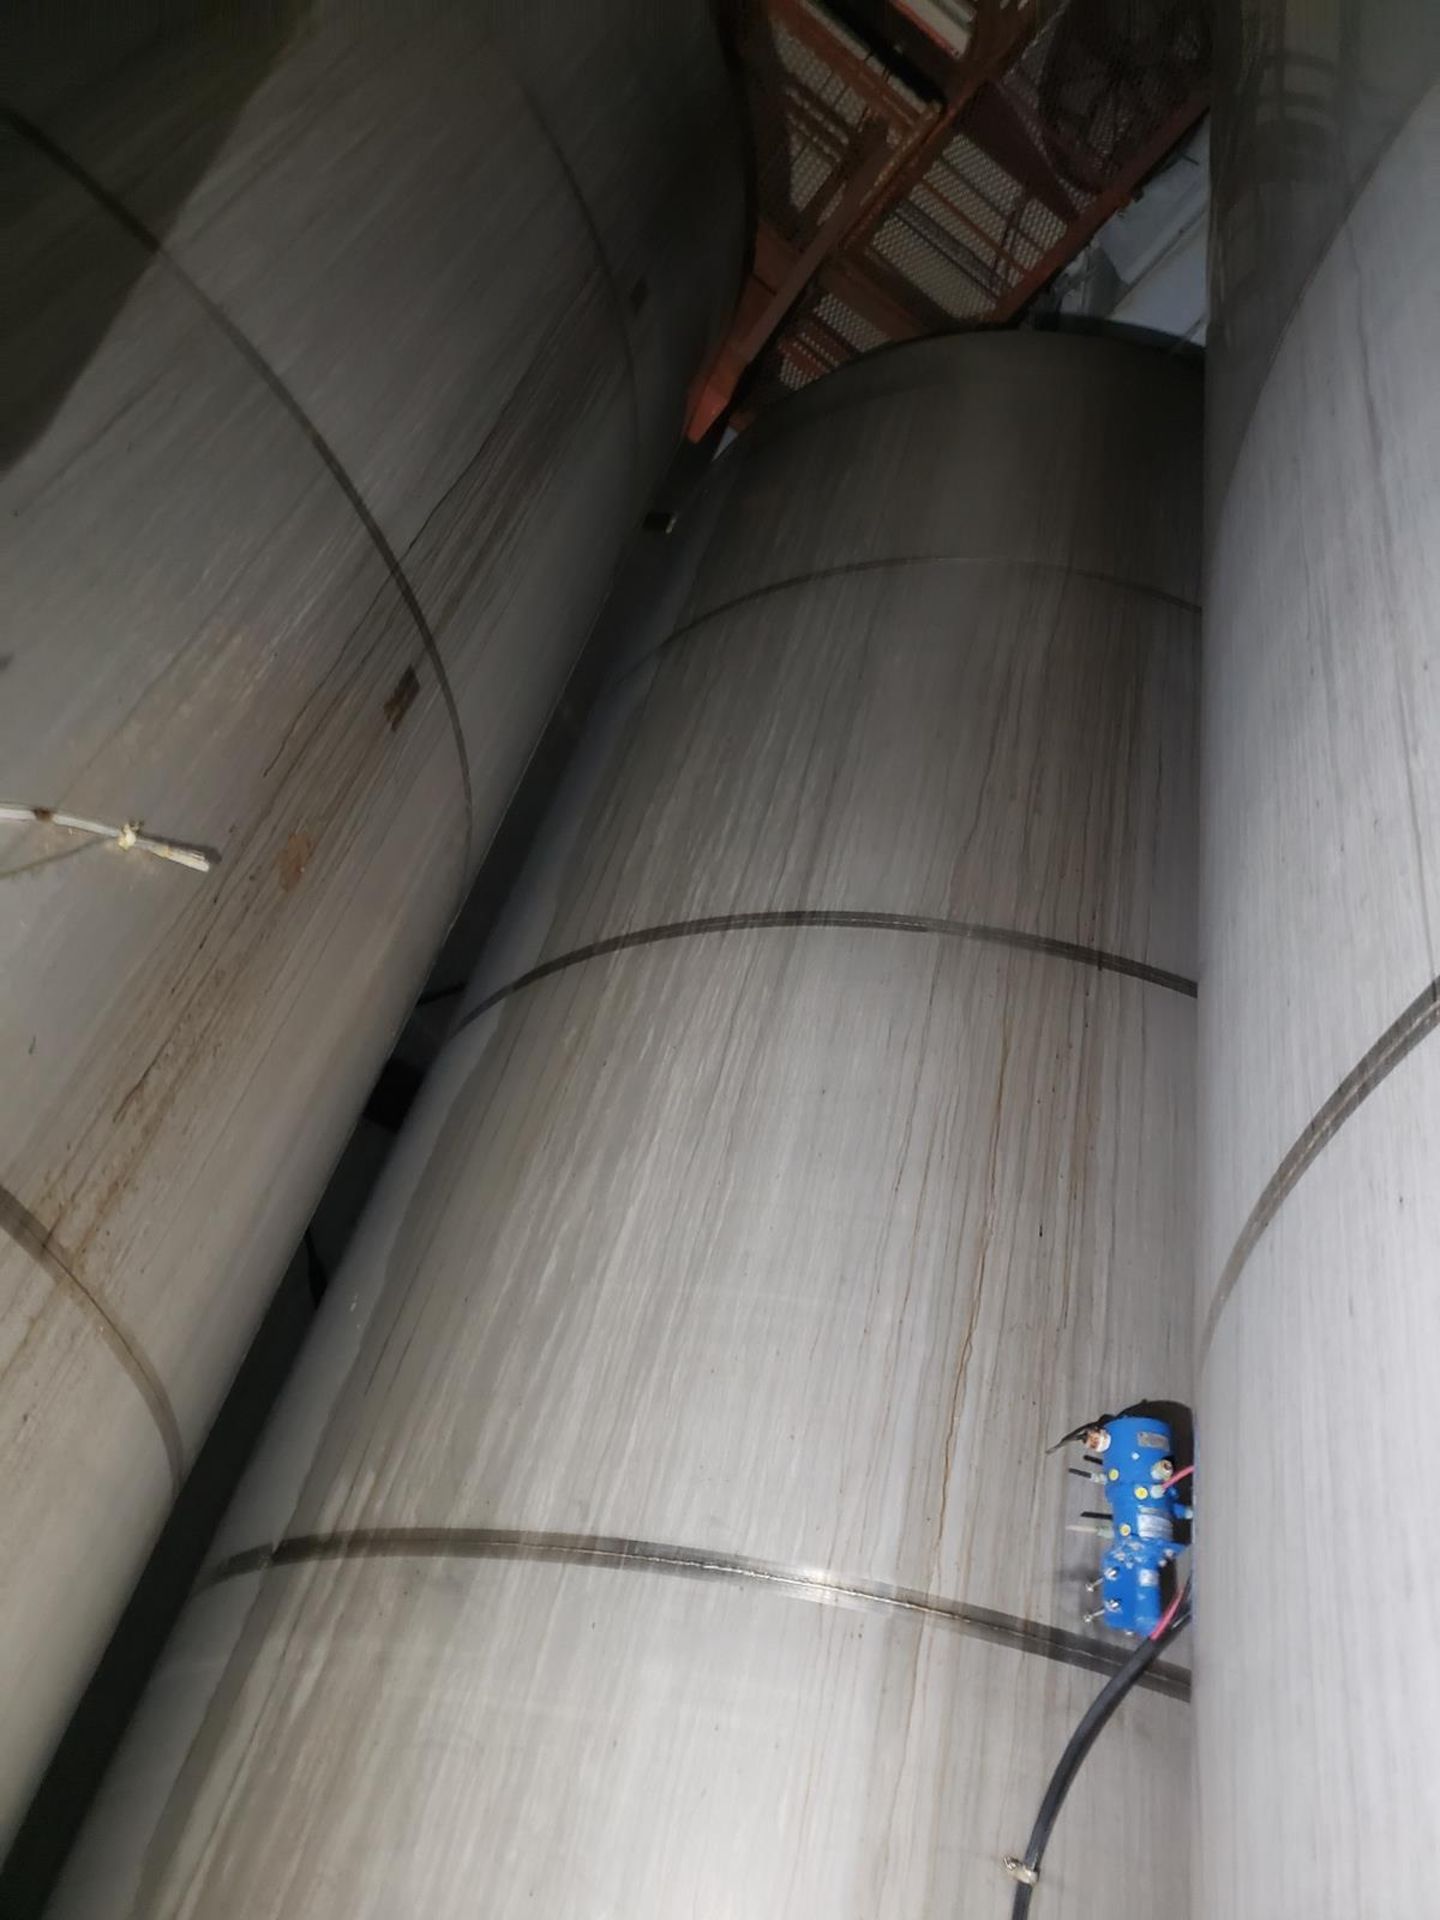 Stainless Steel 8,500 Gallon Vertical Storage Tank, Top Drive Vertical Agitator, | Rig Fee: $8500 - Image 2 of 4